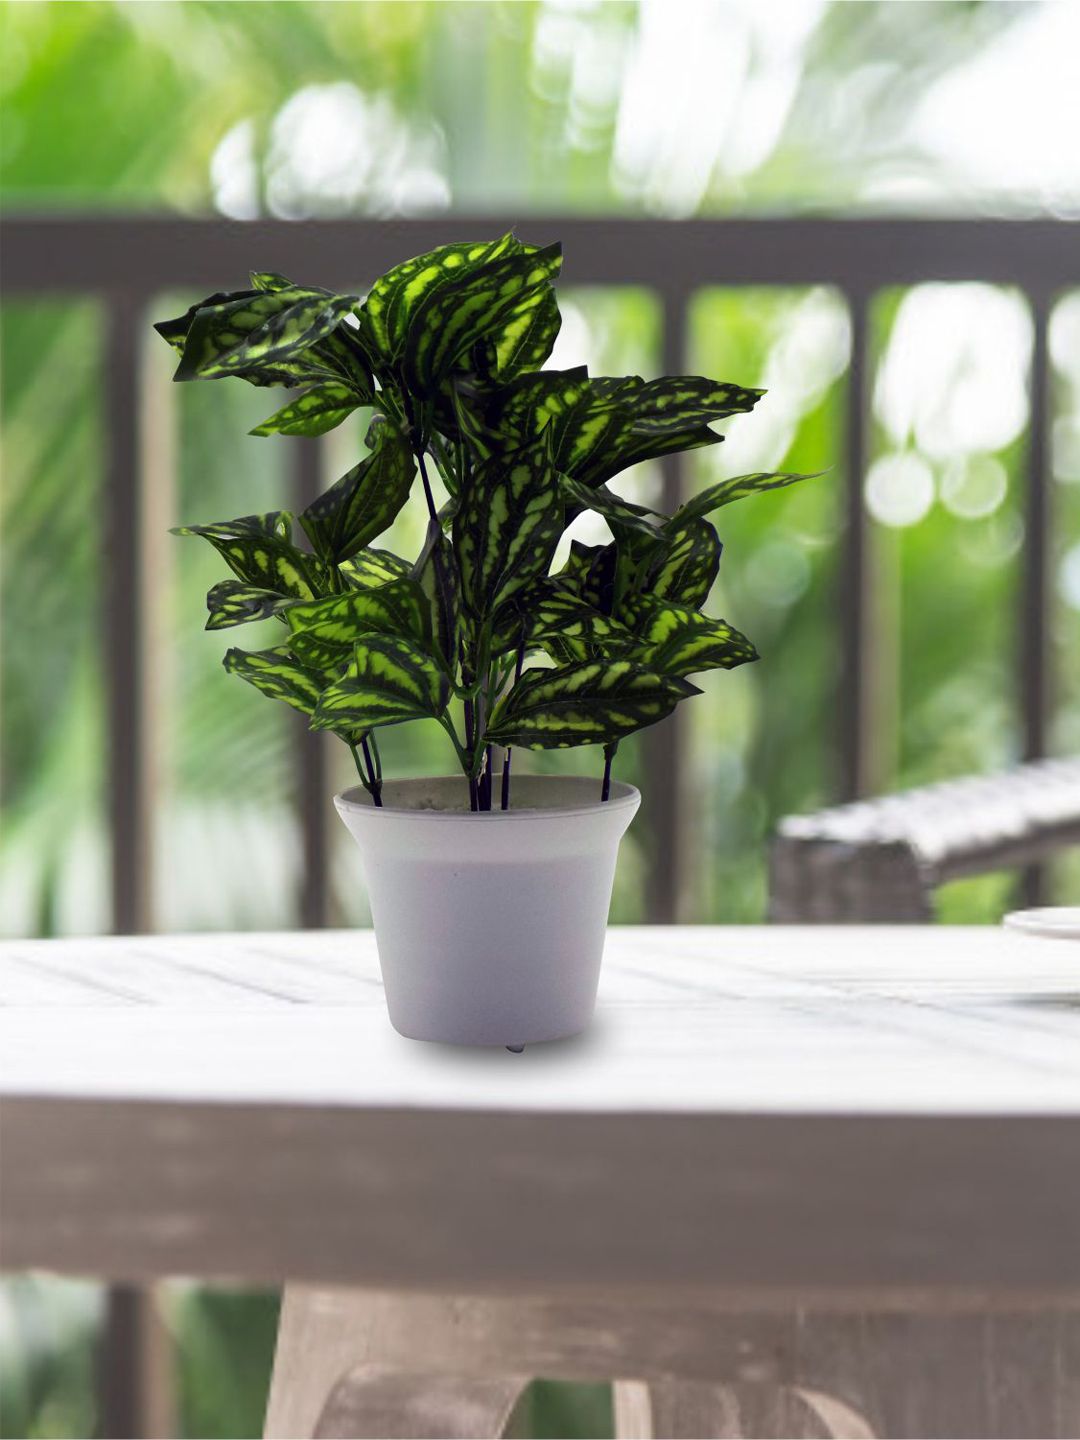 MARKET99 Green Artificial Plant With Pot Price in India